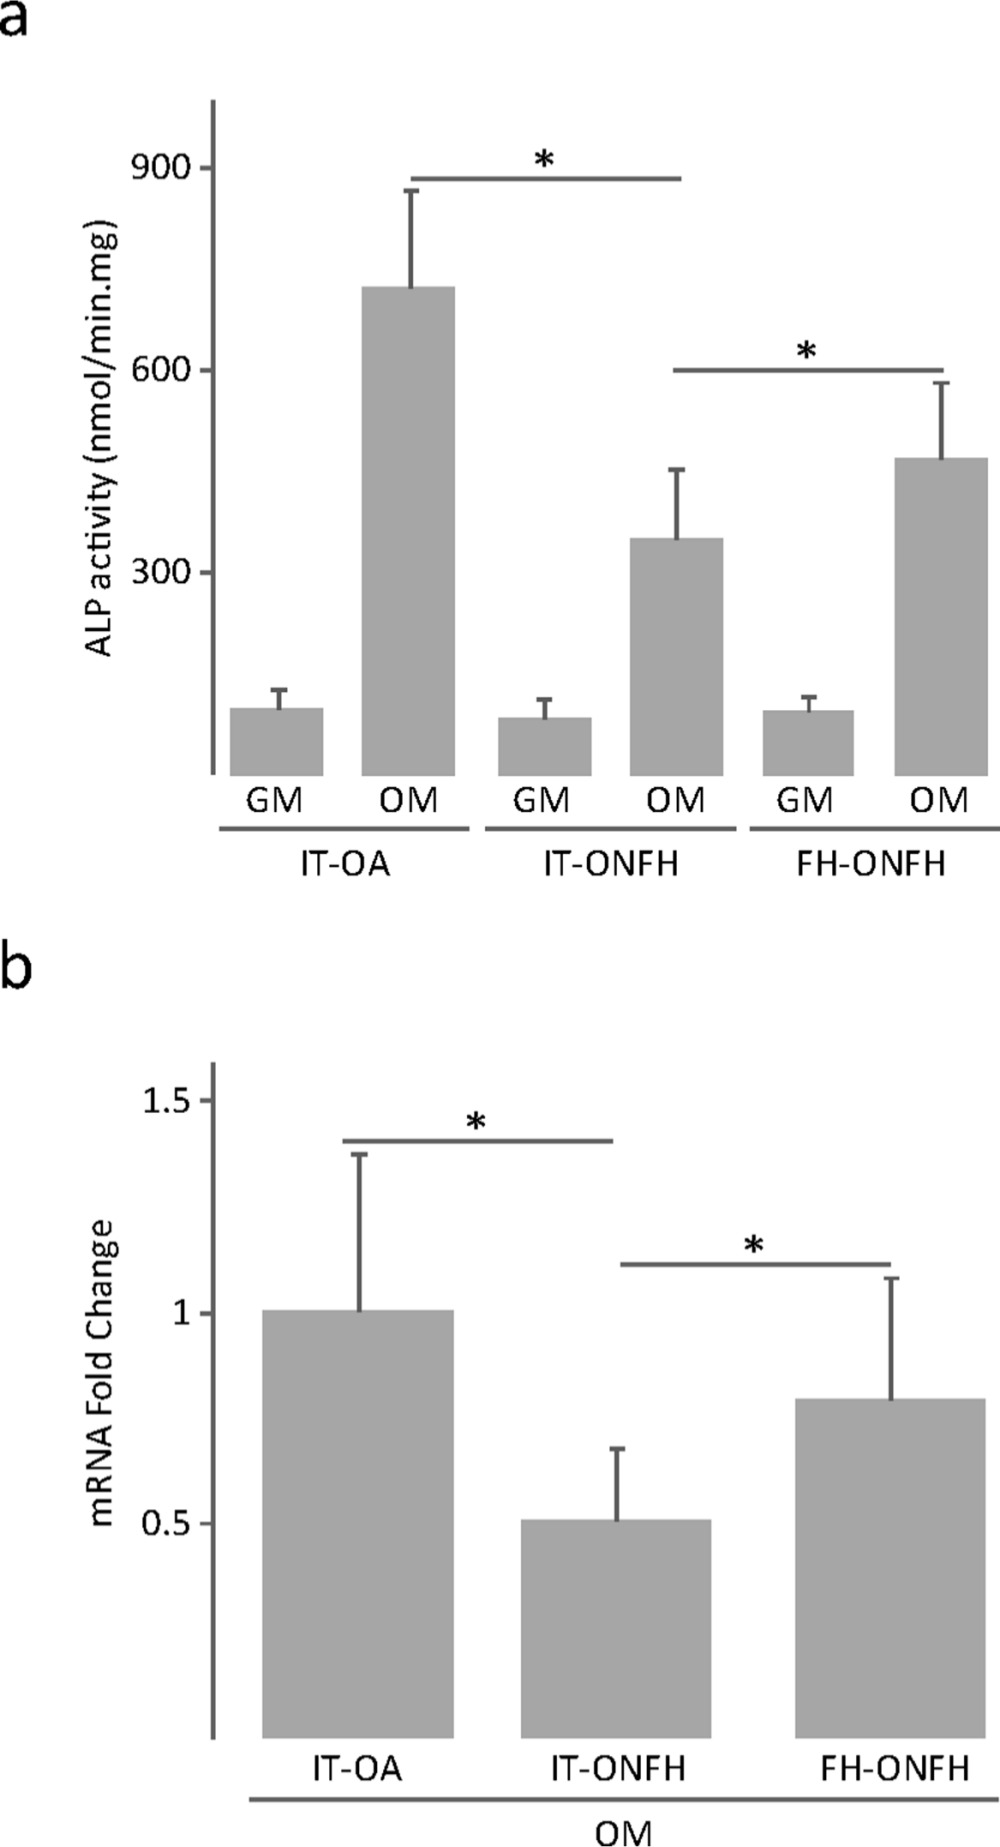 Fig. 4 
            Alkaline phosphatase (ALP) activity in osteoblasts from patients with osteonecrosis of the femoral head (ONFH). a) ALP activity and b) ALPL messenger RNA (mRNA) levels in osteoblasts obtained from the intertrochanteric region (IT) of patients with osteoarthritis (OA) or ONFH and from the femoral head (FH) of patients with ONFH, and cultured in growth medium (GM) or osteogenic medium (OM) for 12 days. The data in (b) were normalized relative to those measured in osteoblasts from IT-OA, which were given an arbitrary value of 1. *p < 0.05 between the indicated conditions, Mann–Whitney U test and paired Wilcoxon test.
          